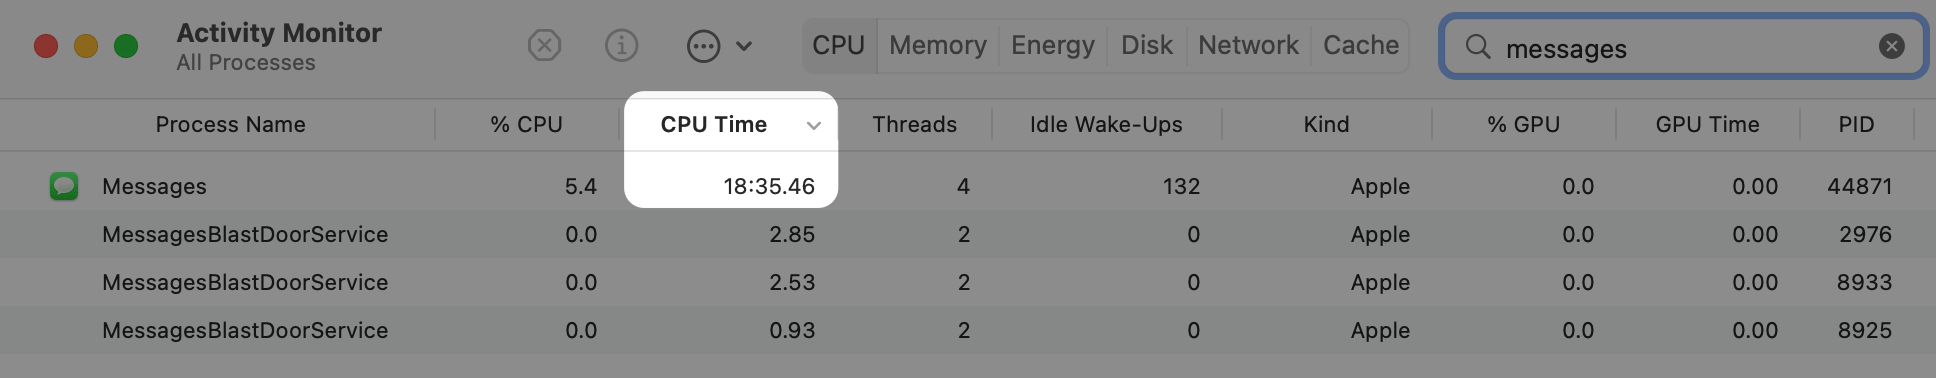 Messages cpu time